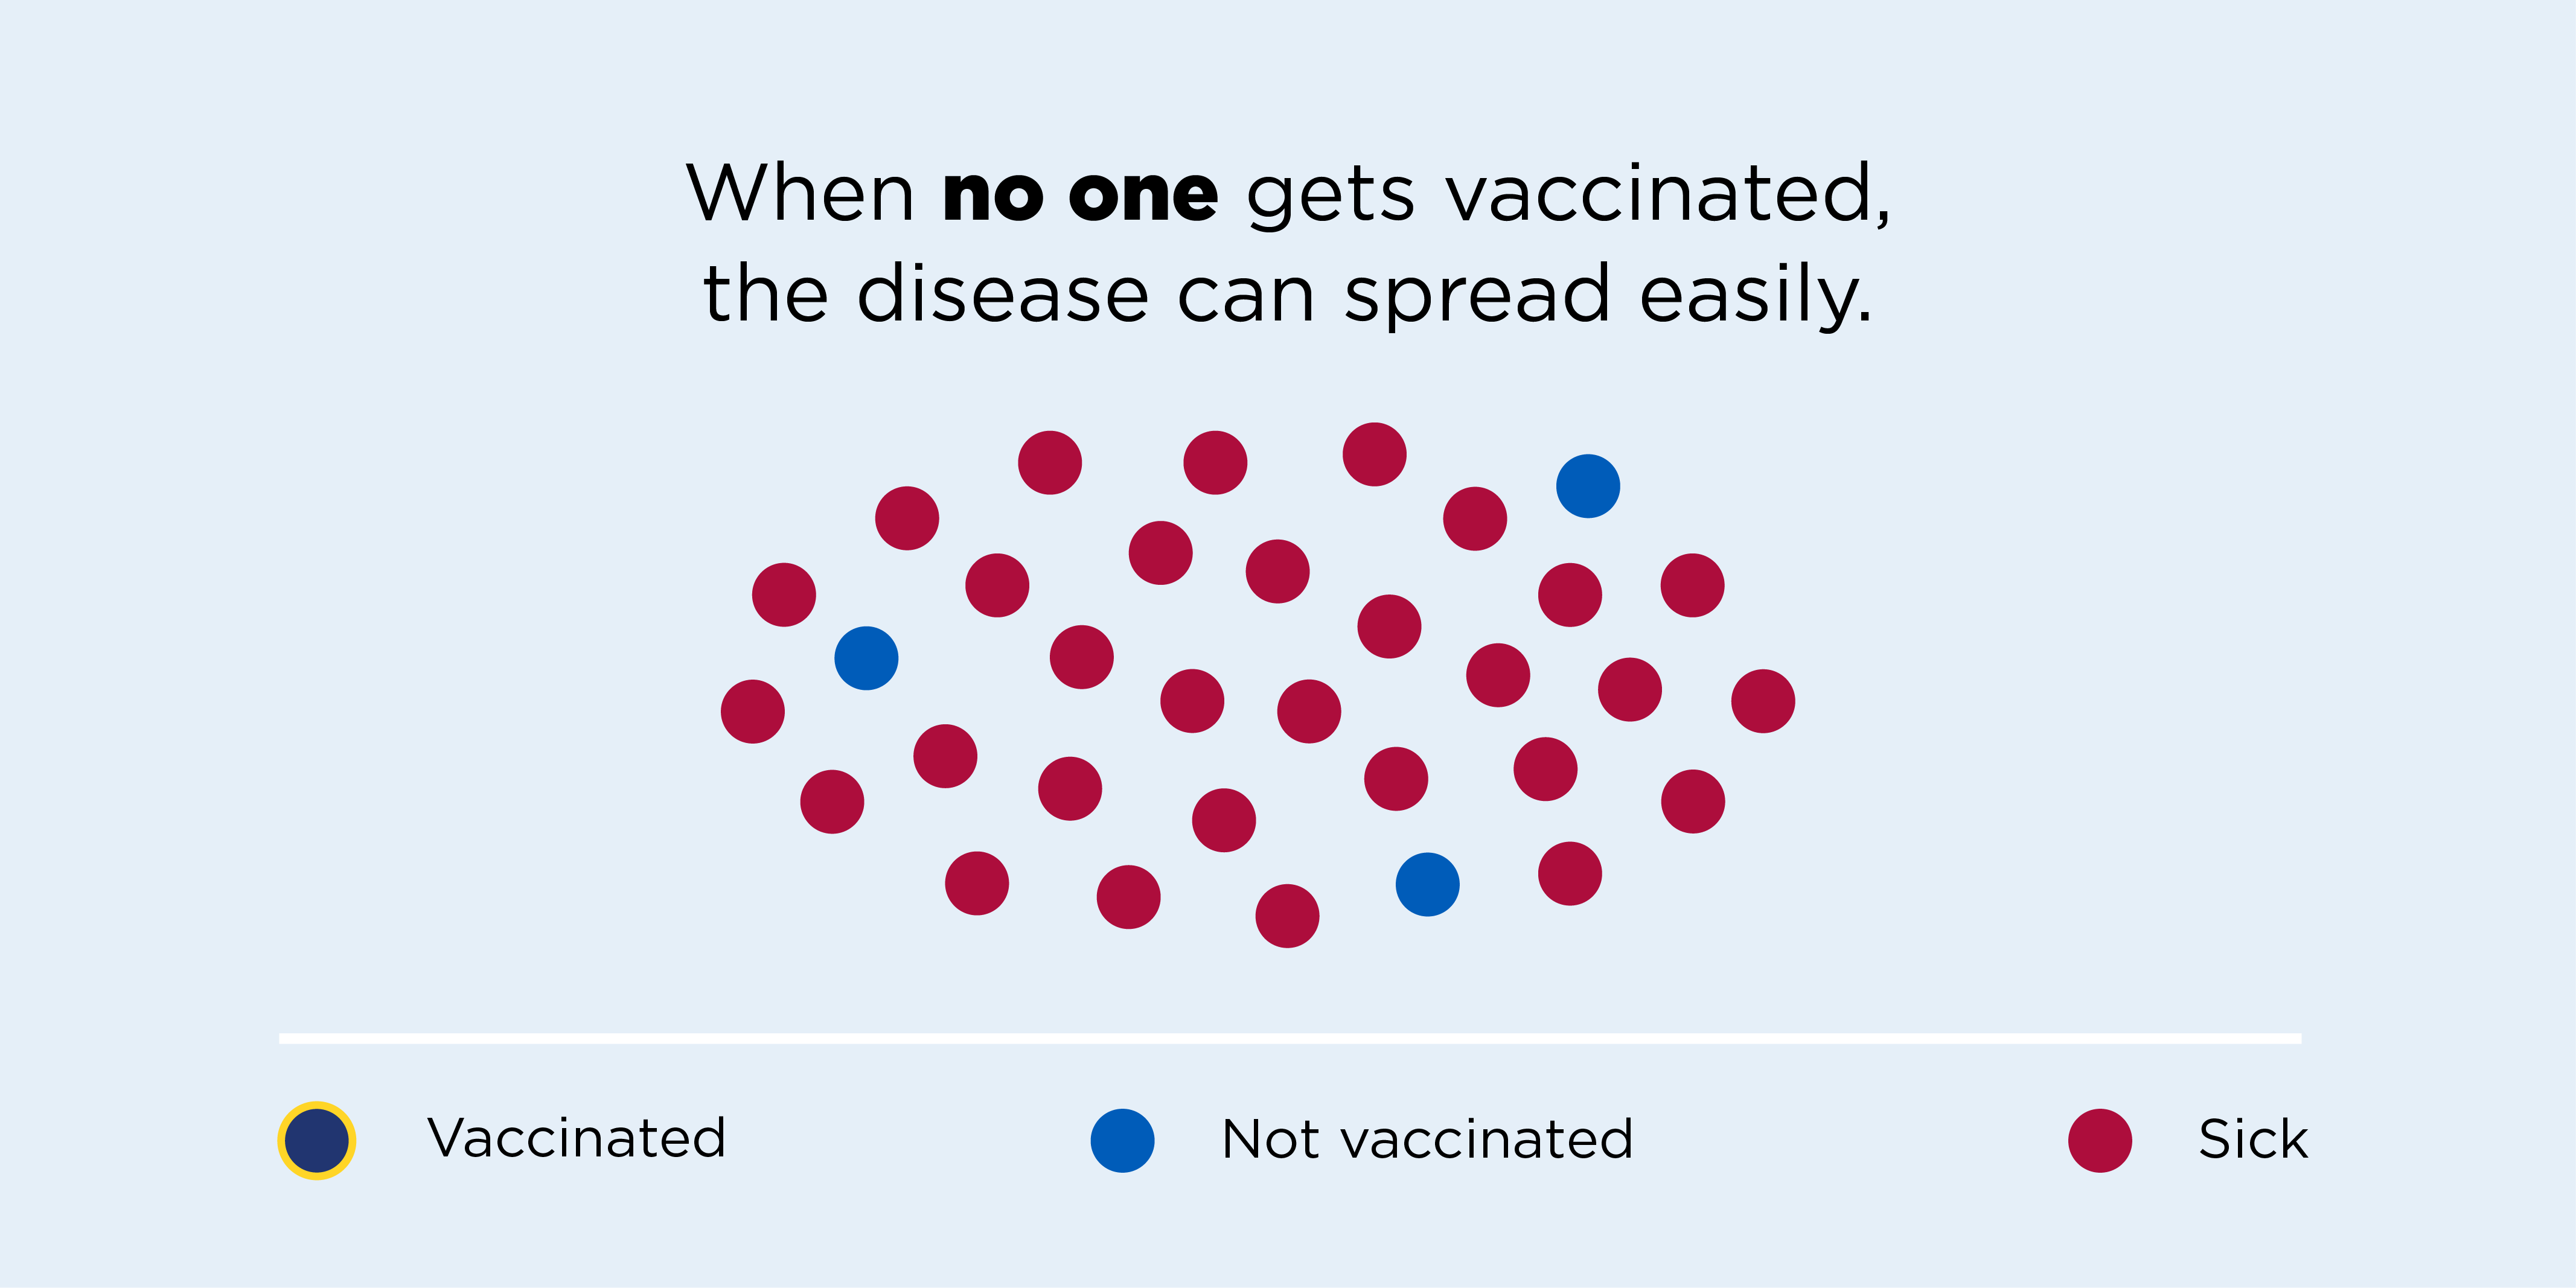 When no one gets vaccinated, the disease can spread easily